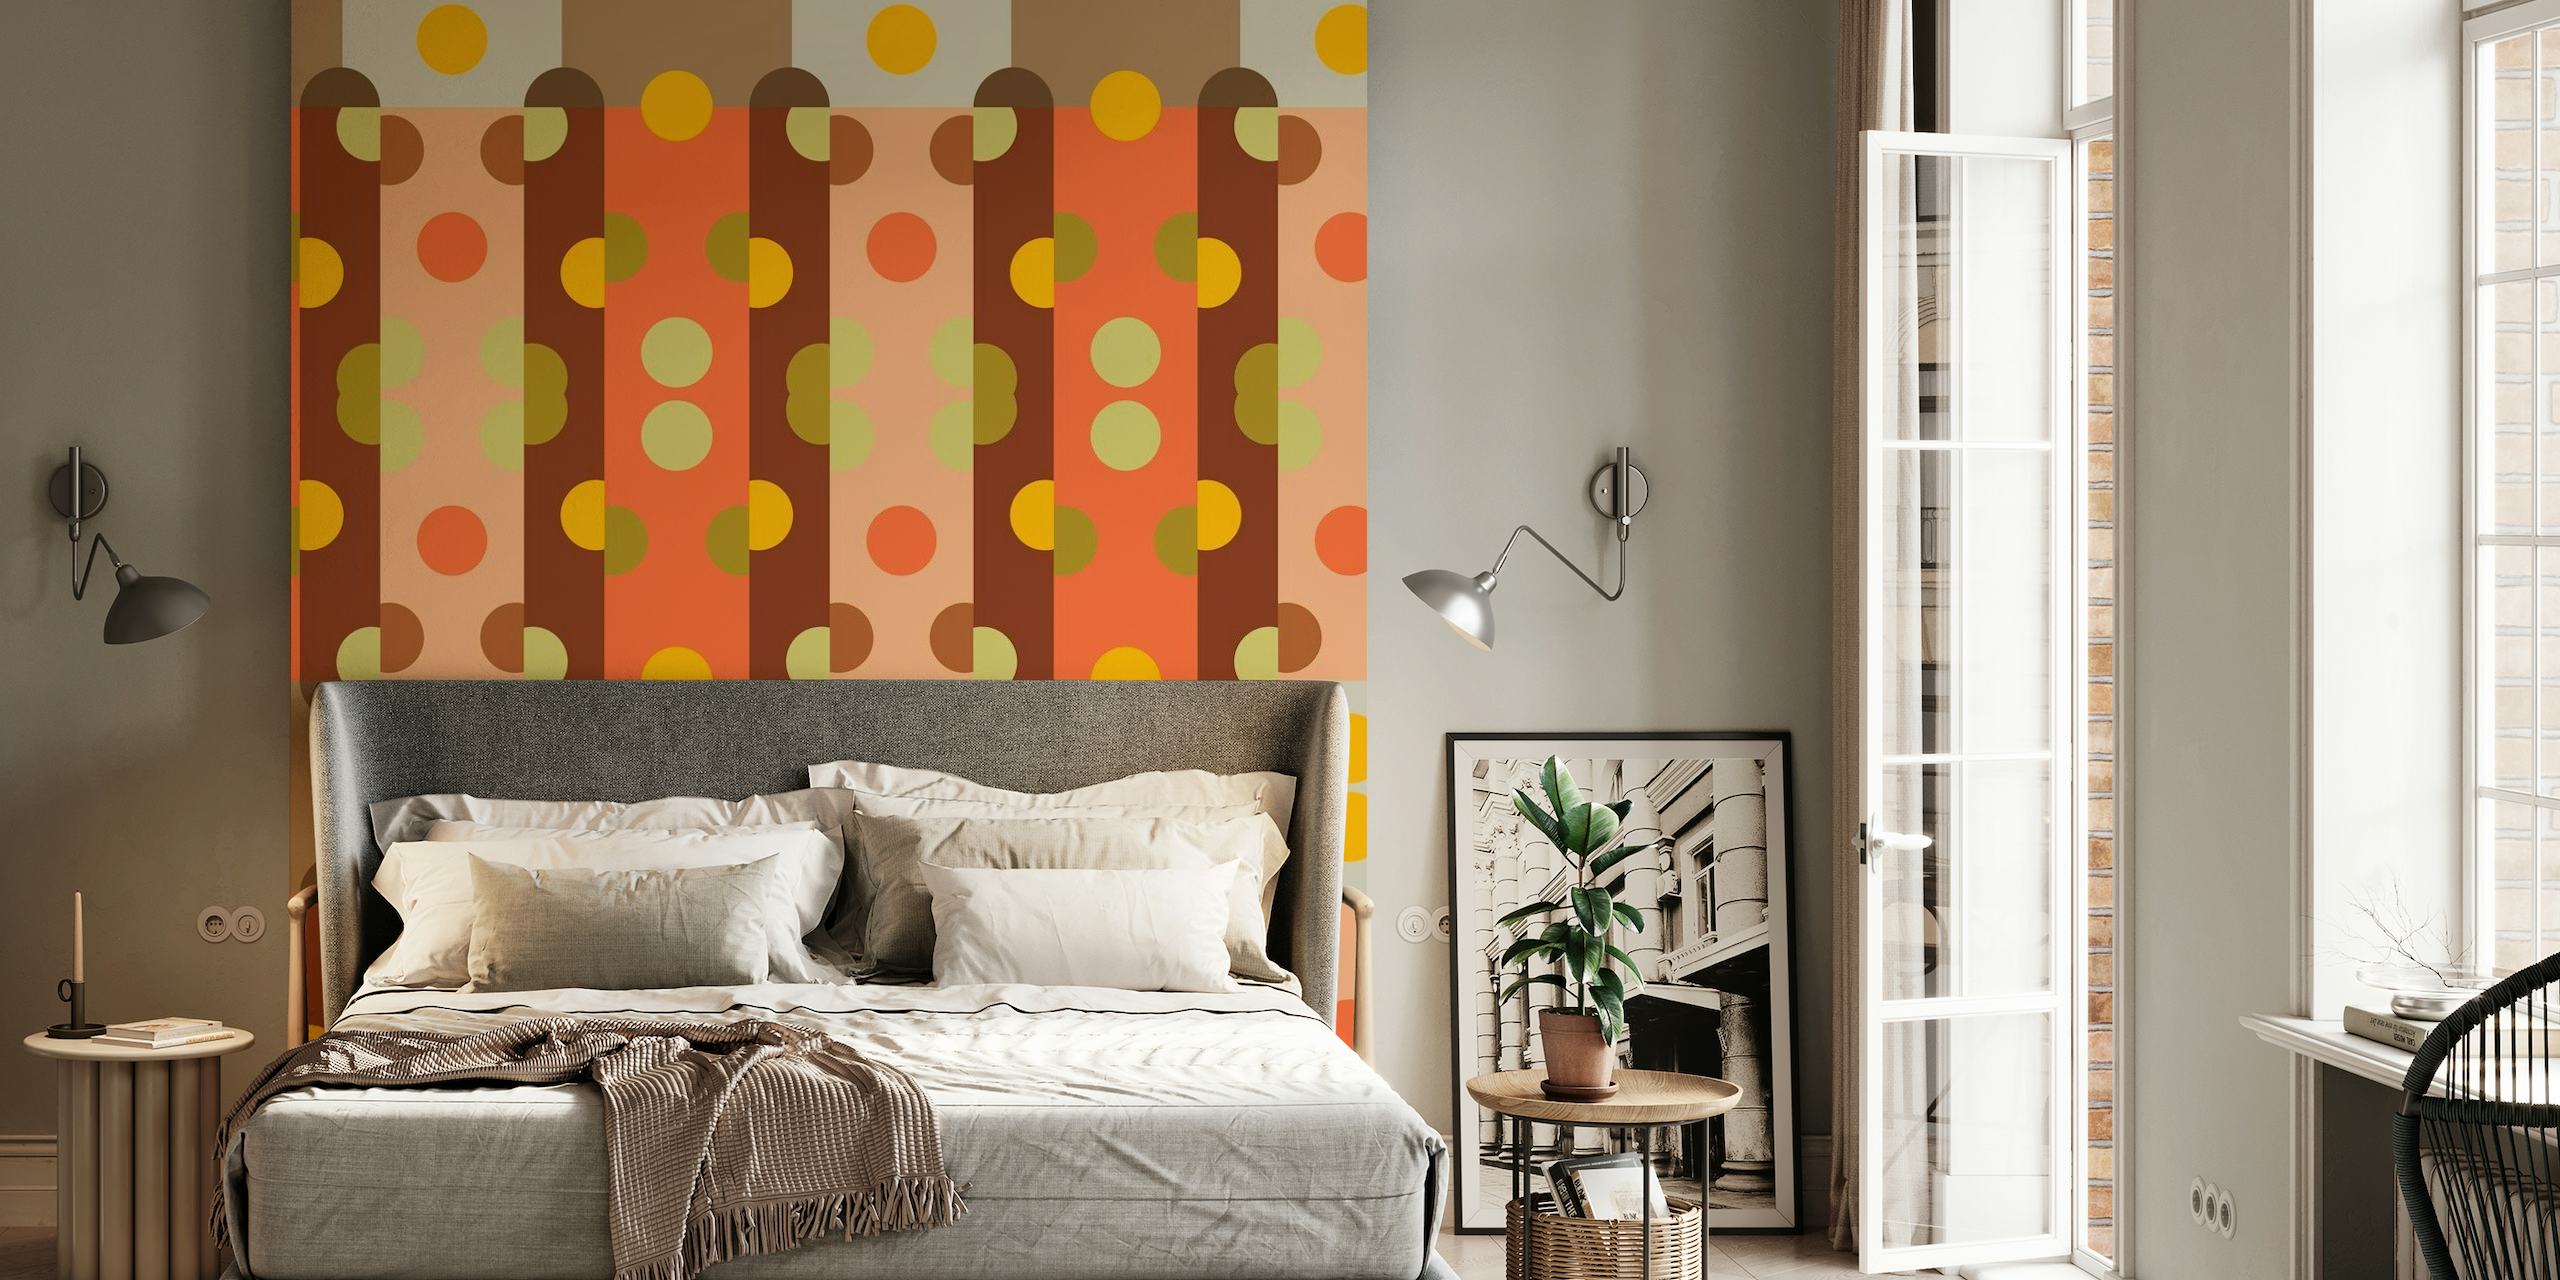 Vintage-style wall mural with retro pattern featuring earth tones, orange, and green.